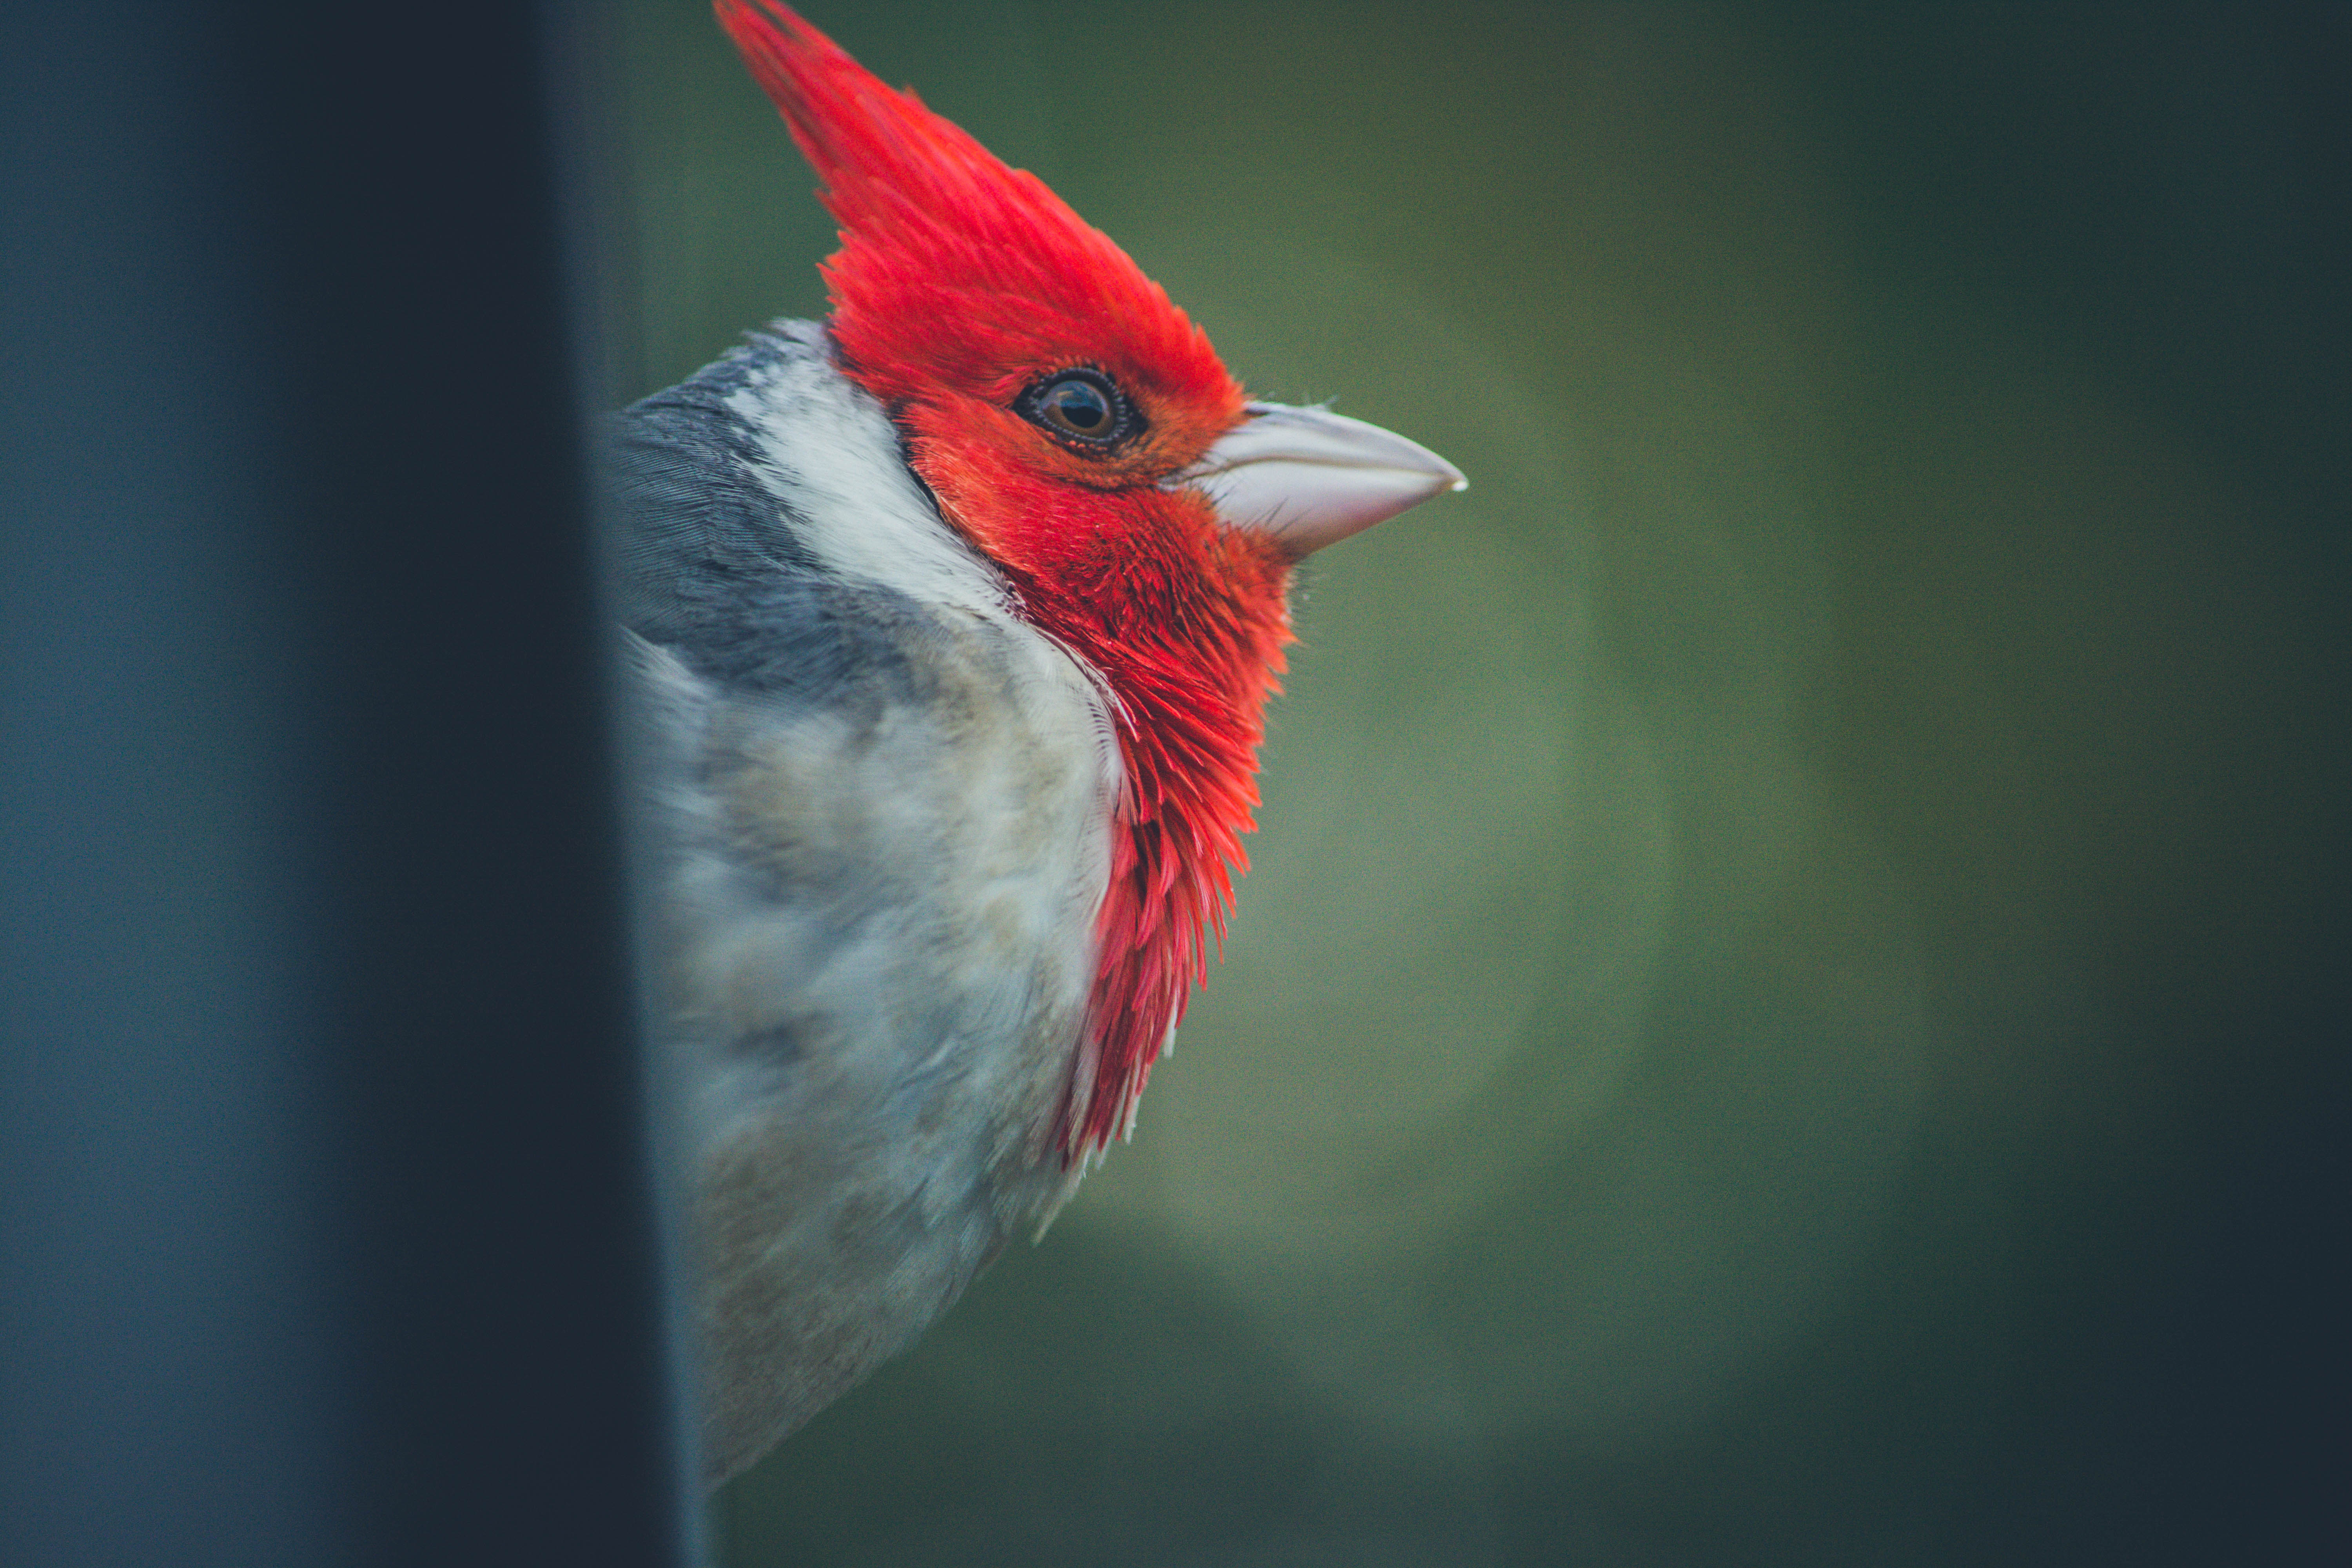 Bird with red head side view